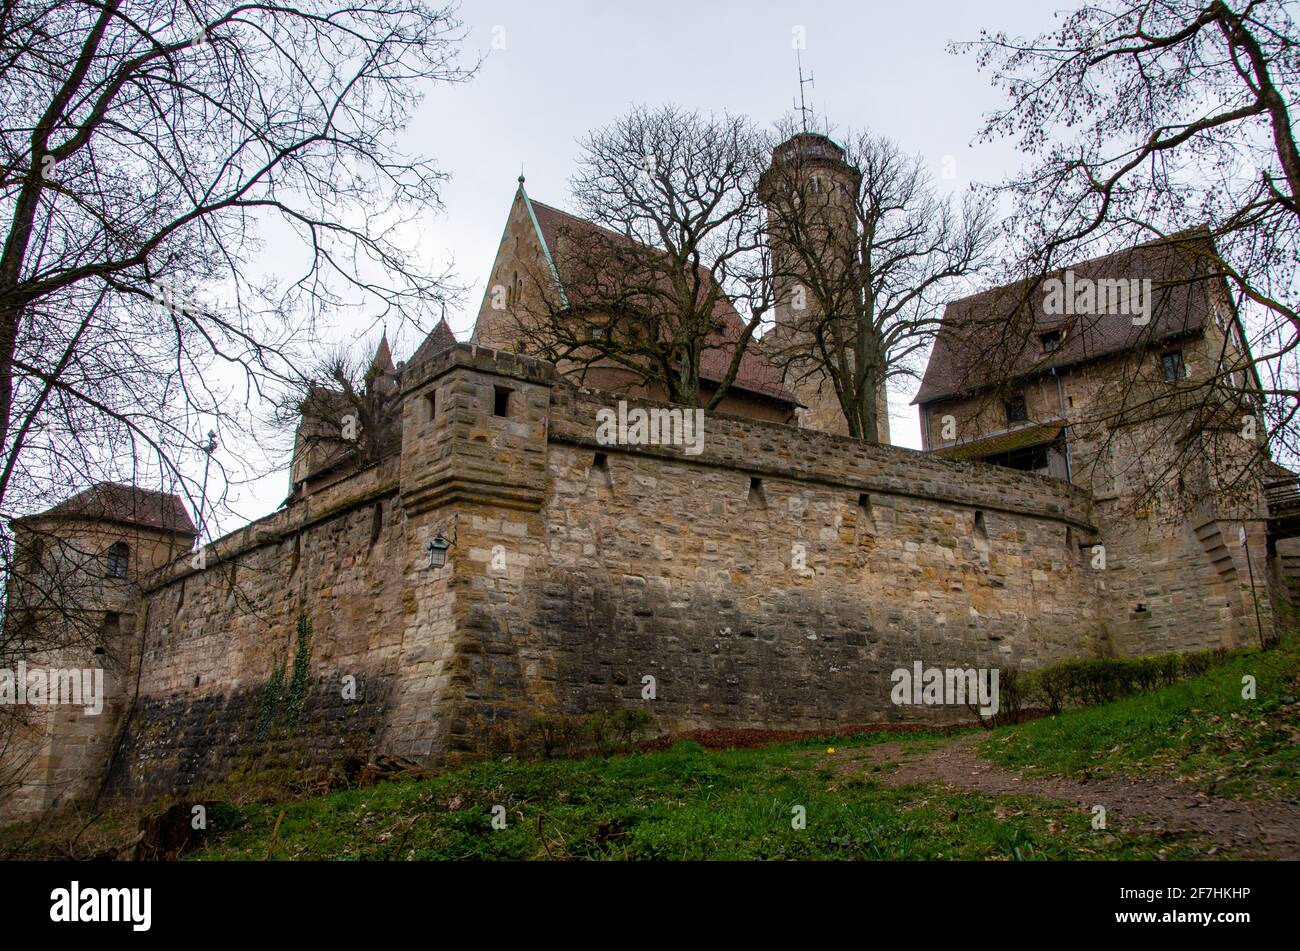 Bamberg, Germany, 20.02.2021. Exterior view of the Altenburg Castle near the historic Franconian town of Bamberg Stock Photo